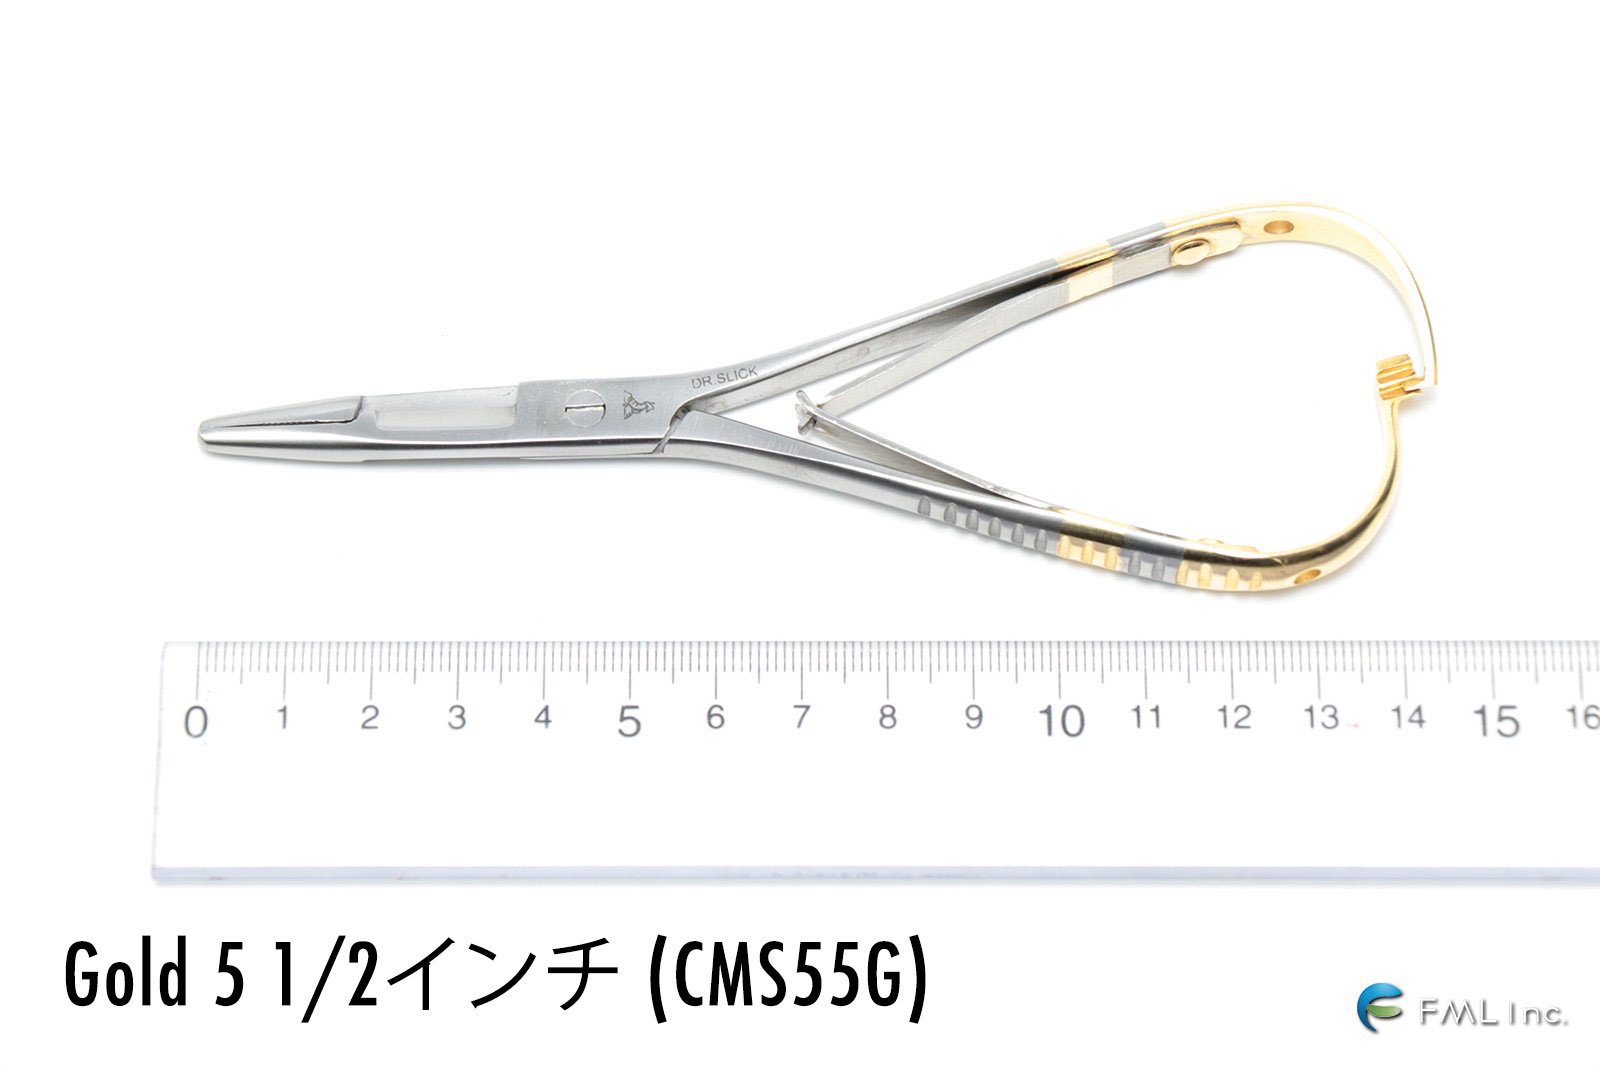 DR.SLICK Mitten Clamps Gold 5 1/2インチ (CMS55G) - FML FISHING